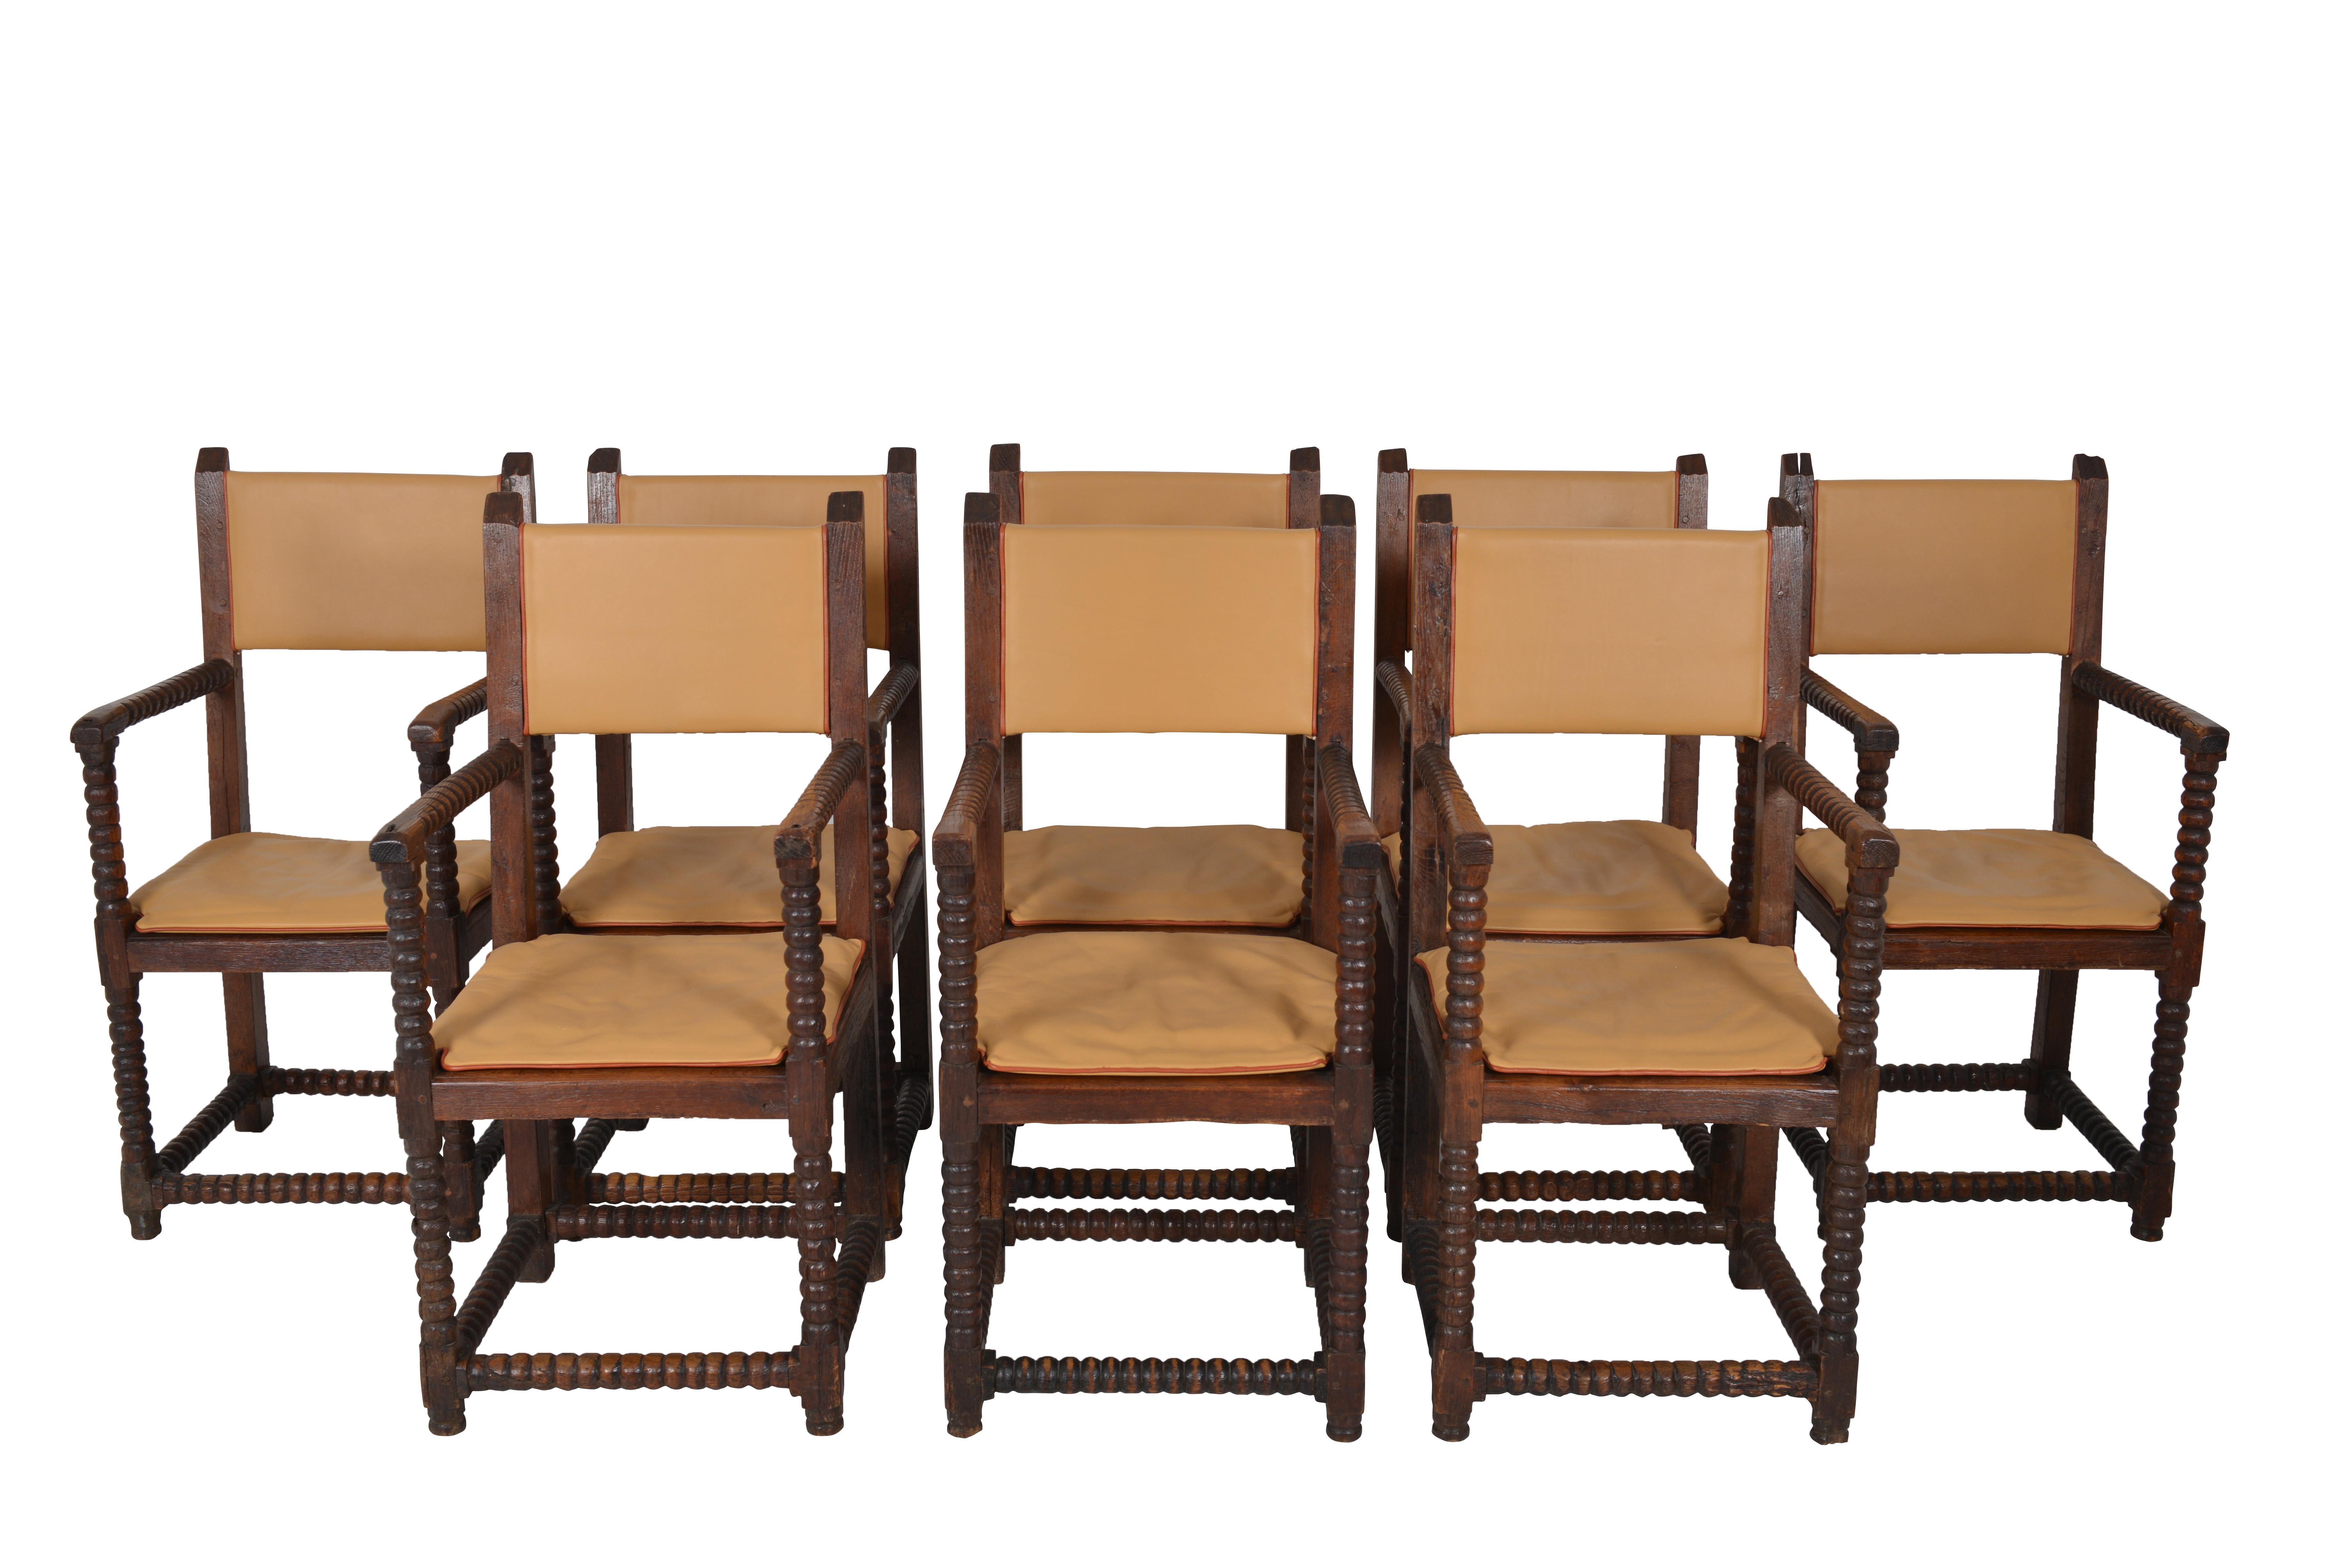 Amazing set of 8 oak French Louis XIII dining chairs. These “spool” armchairs have bobbin turned legs and armrests. “Spool” is a classic design since the 1600. The arms, legs and rails were carved on a lathe to create equally ball shapes. The chairs